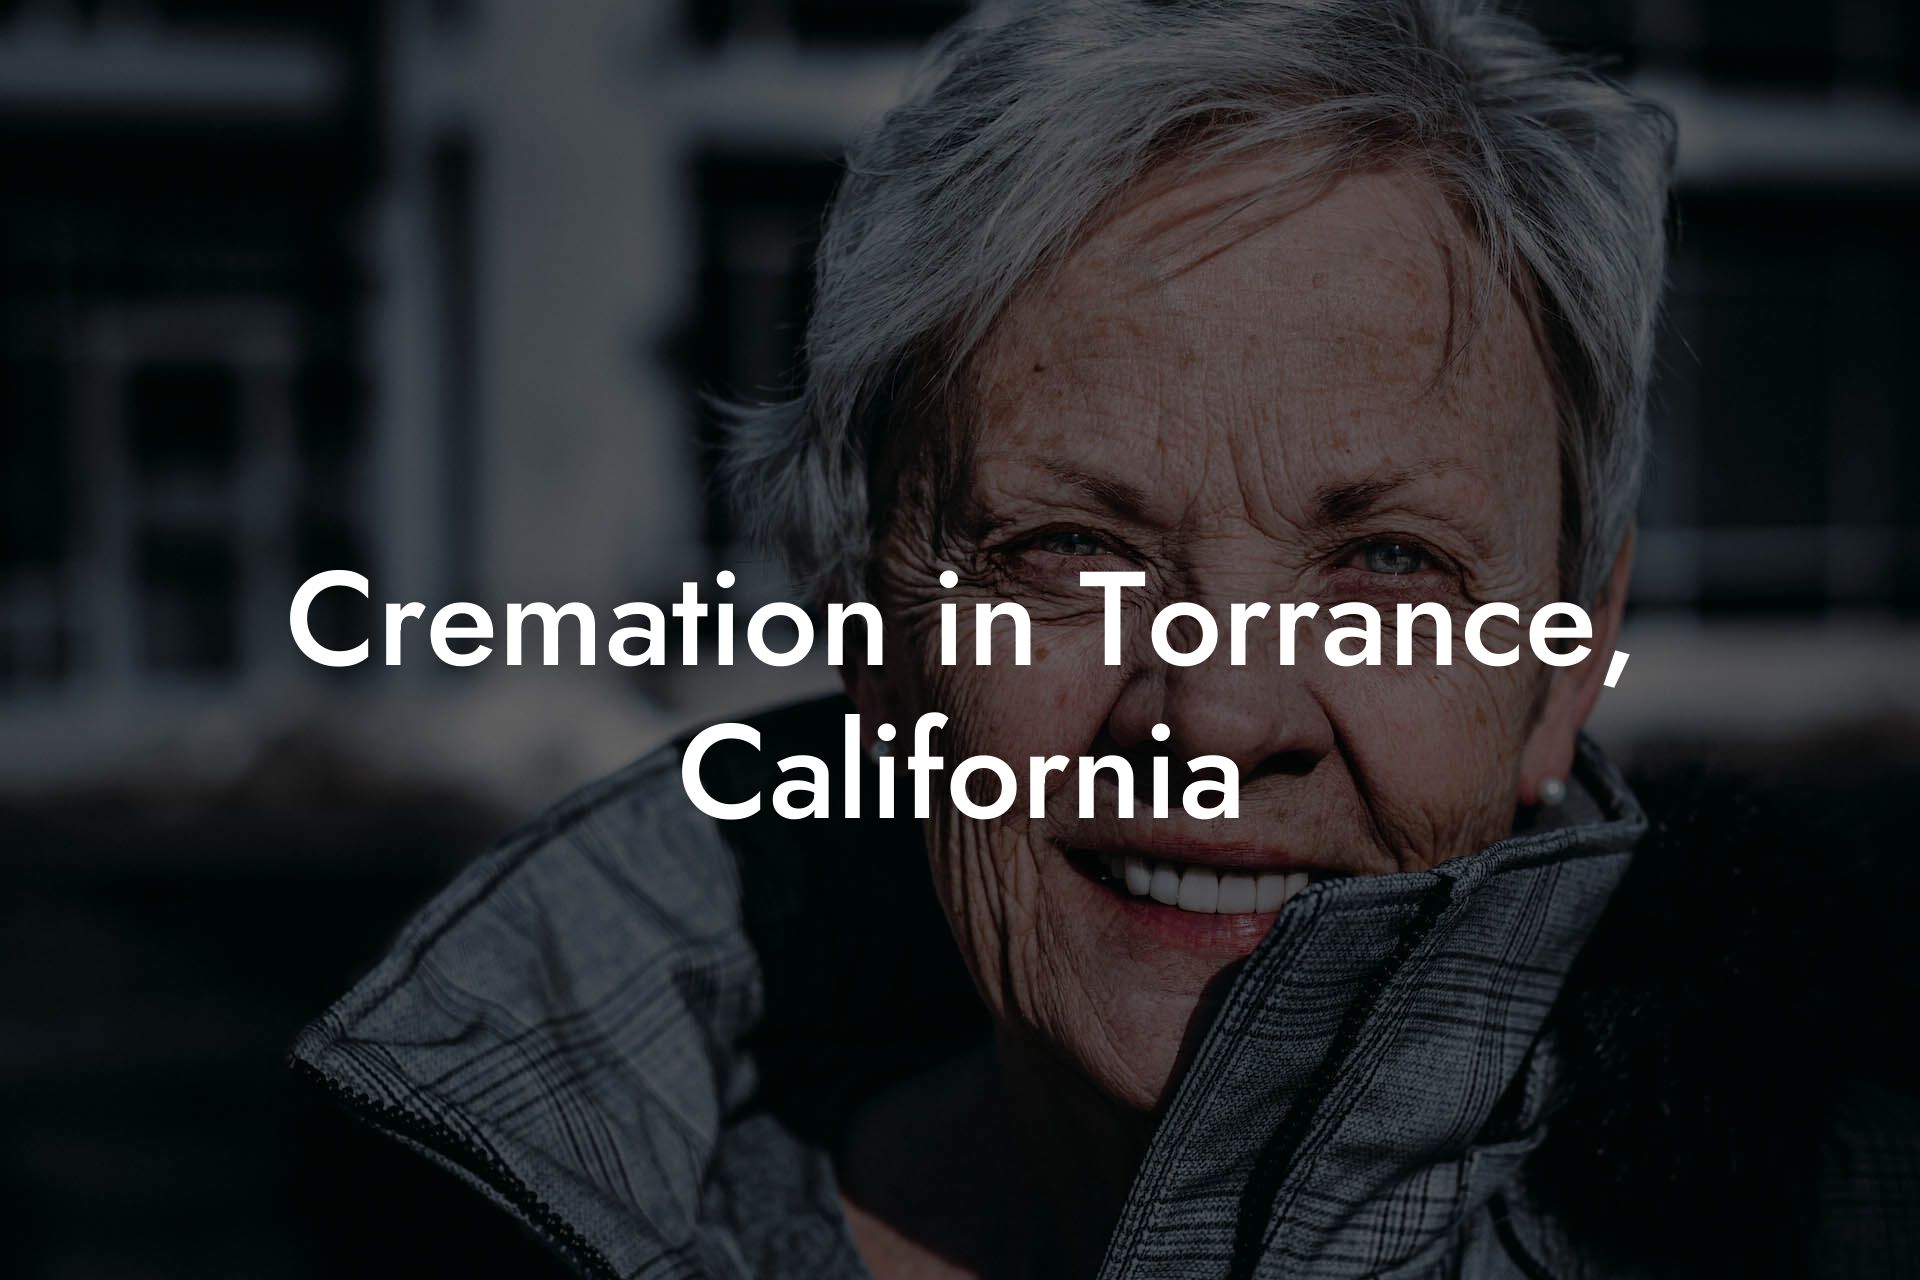 Cremation in Torrance, California